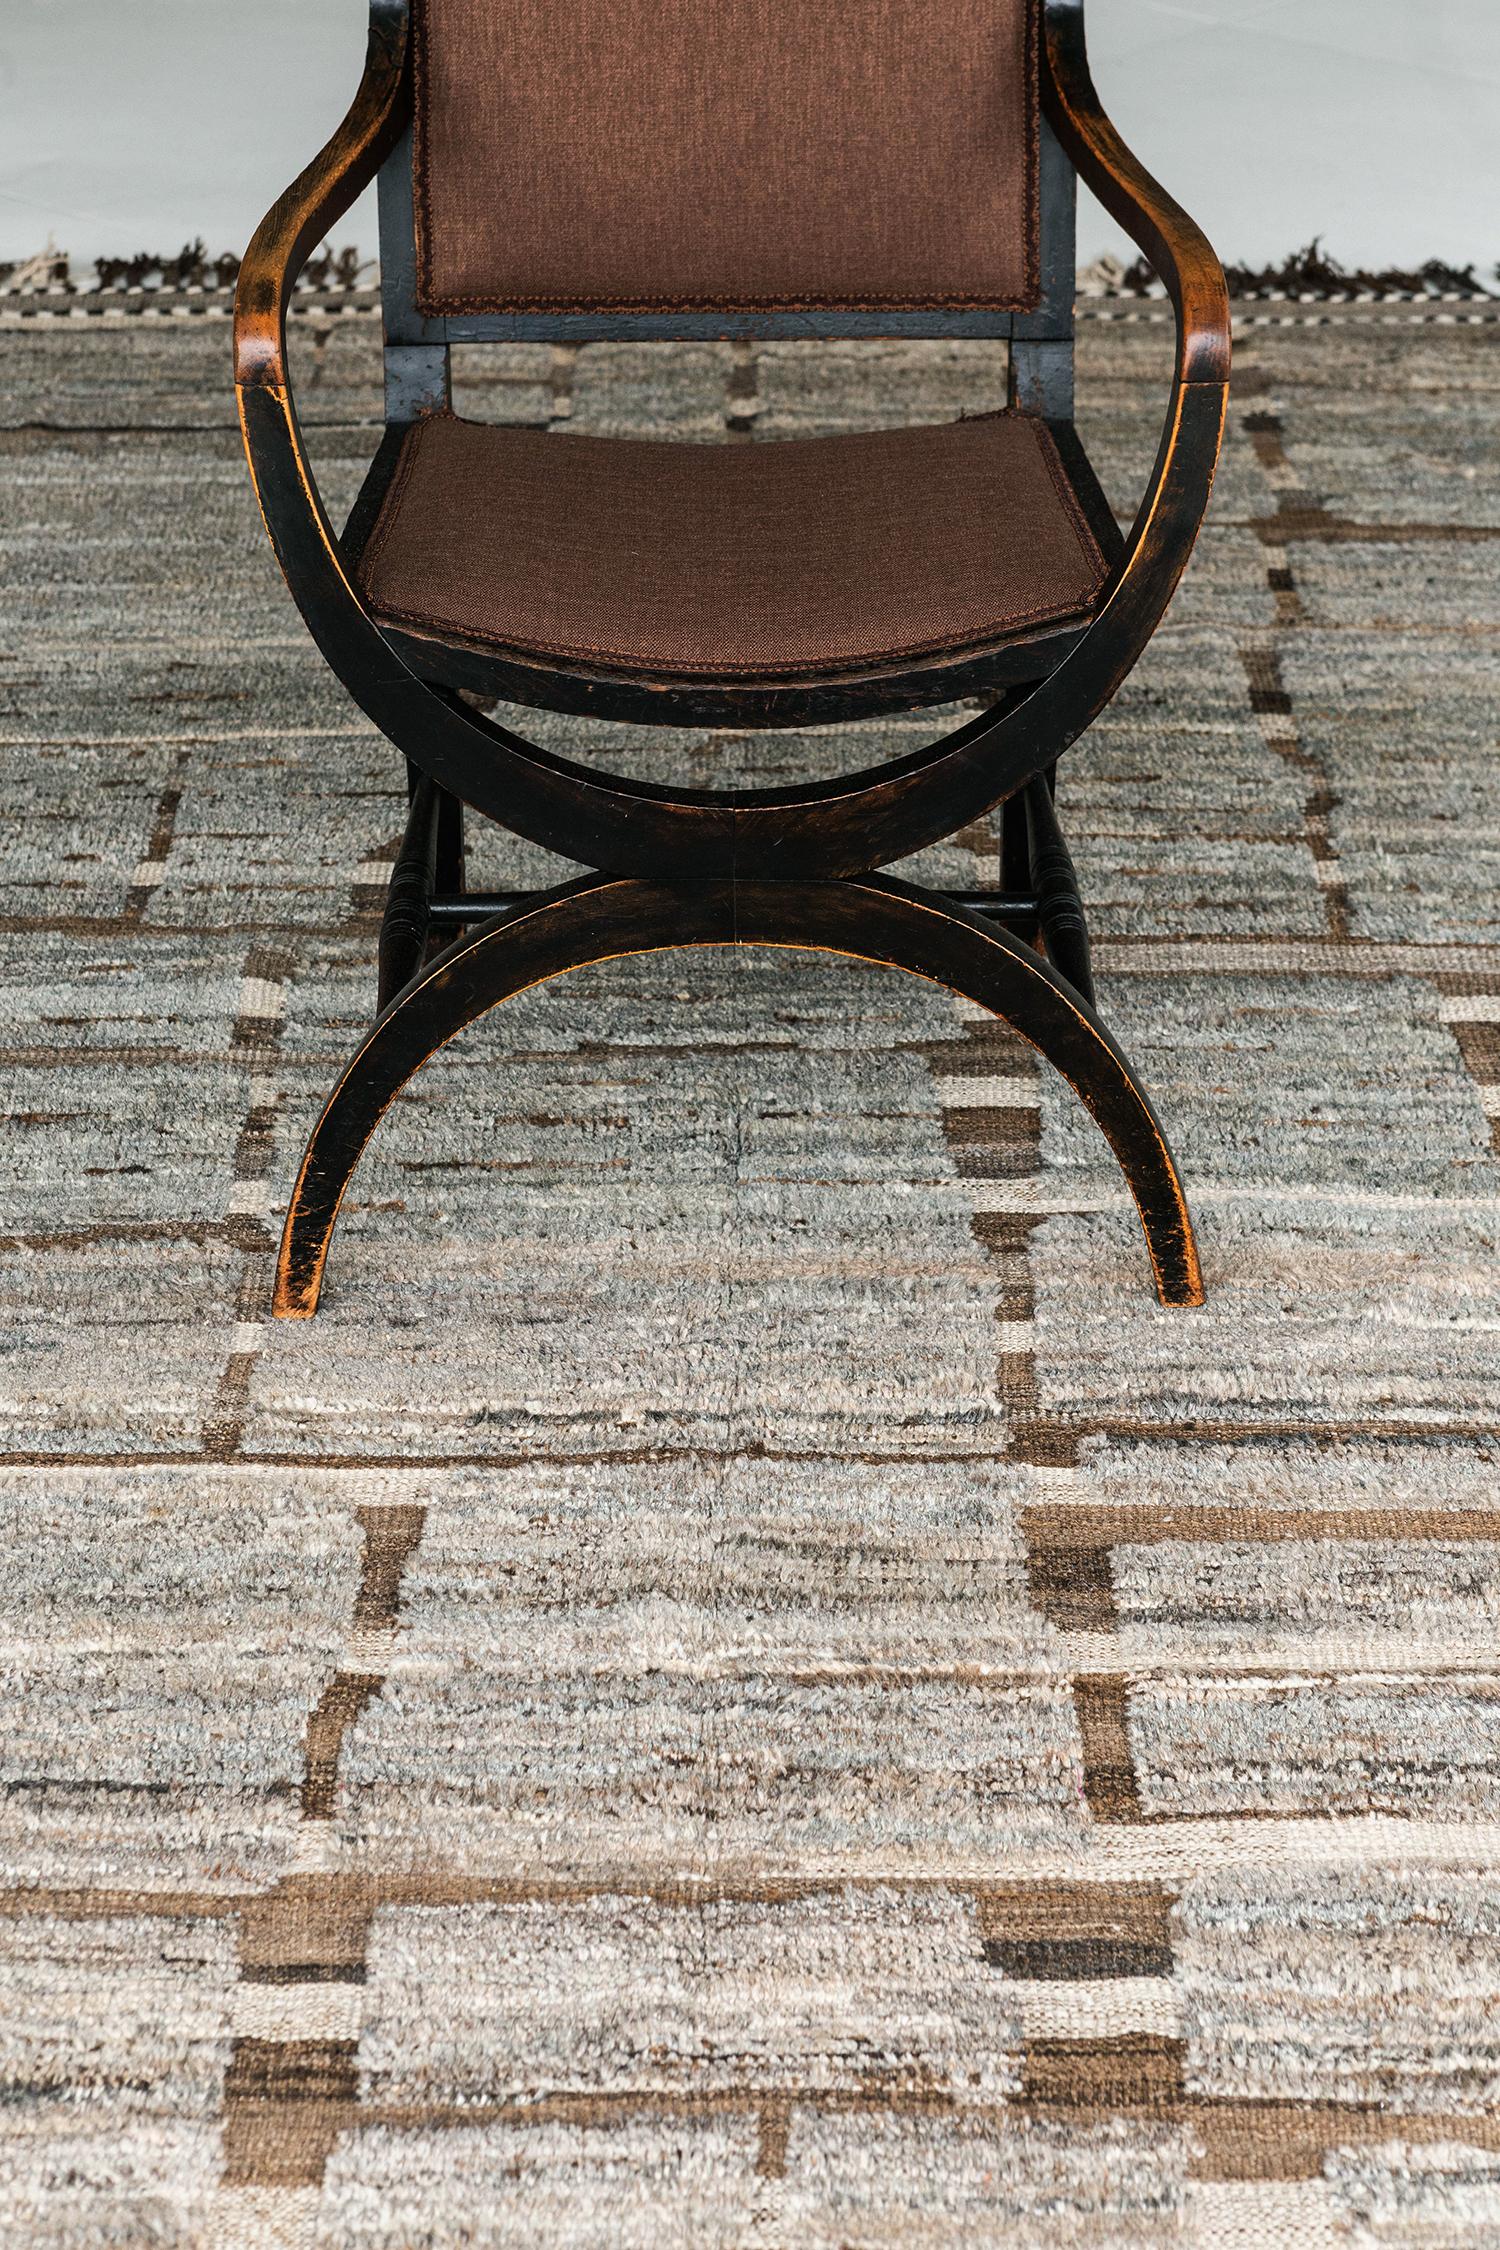 Maziere' is a handwoven wool piece with unique design elements that mirror roman masonry. This luxurious striped brown and ivory pile weave and blue-gray shag make for the perfect contemporary. Maziere is designed in Los Angeles for the modern